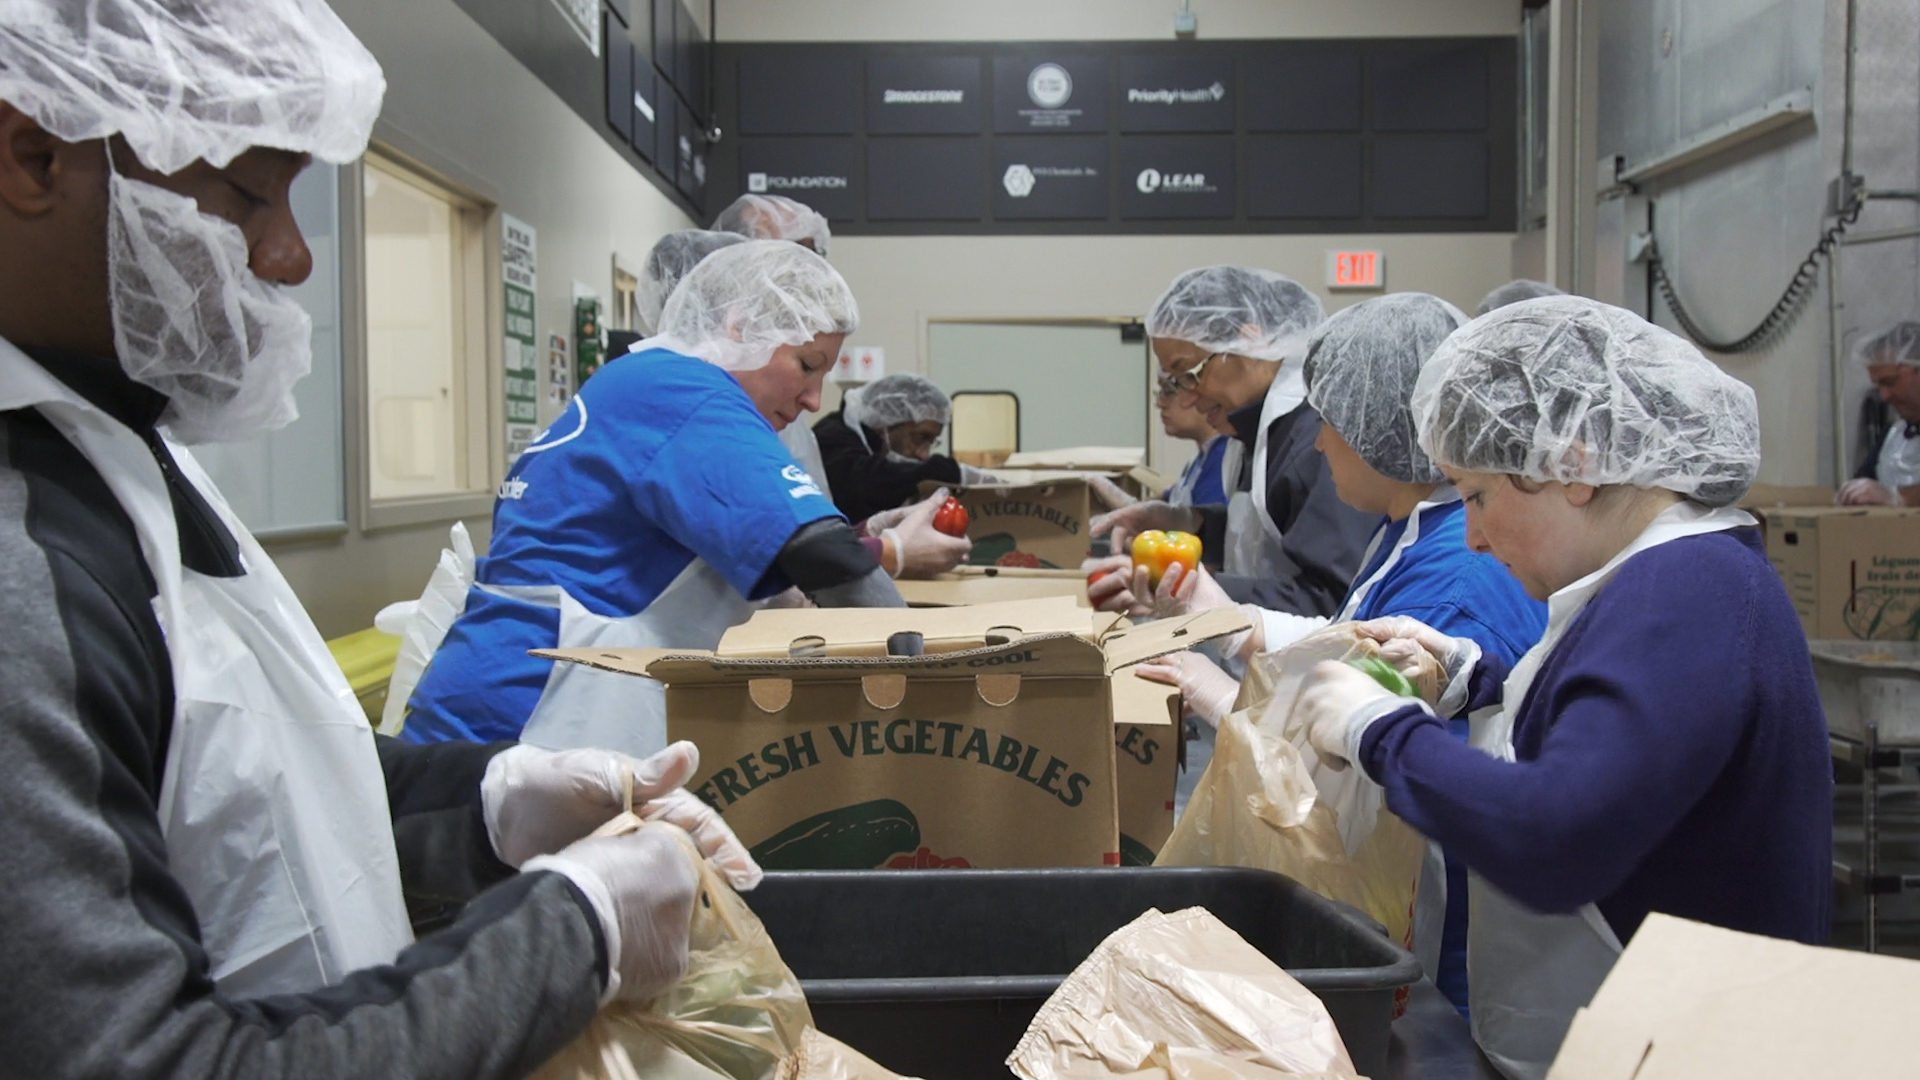 Volunteers pack farm fresh vegetables into cardboard boxes at the Forgotten Harvest warehouse.